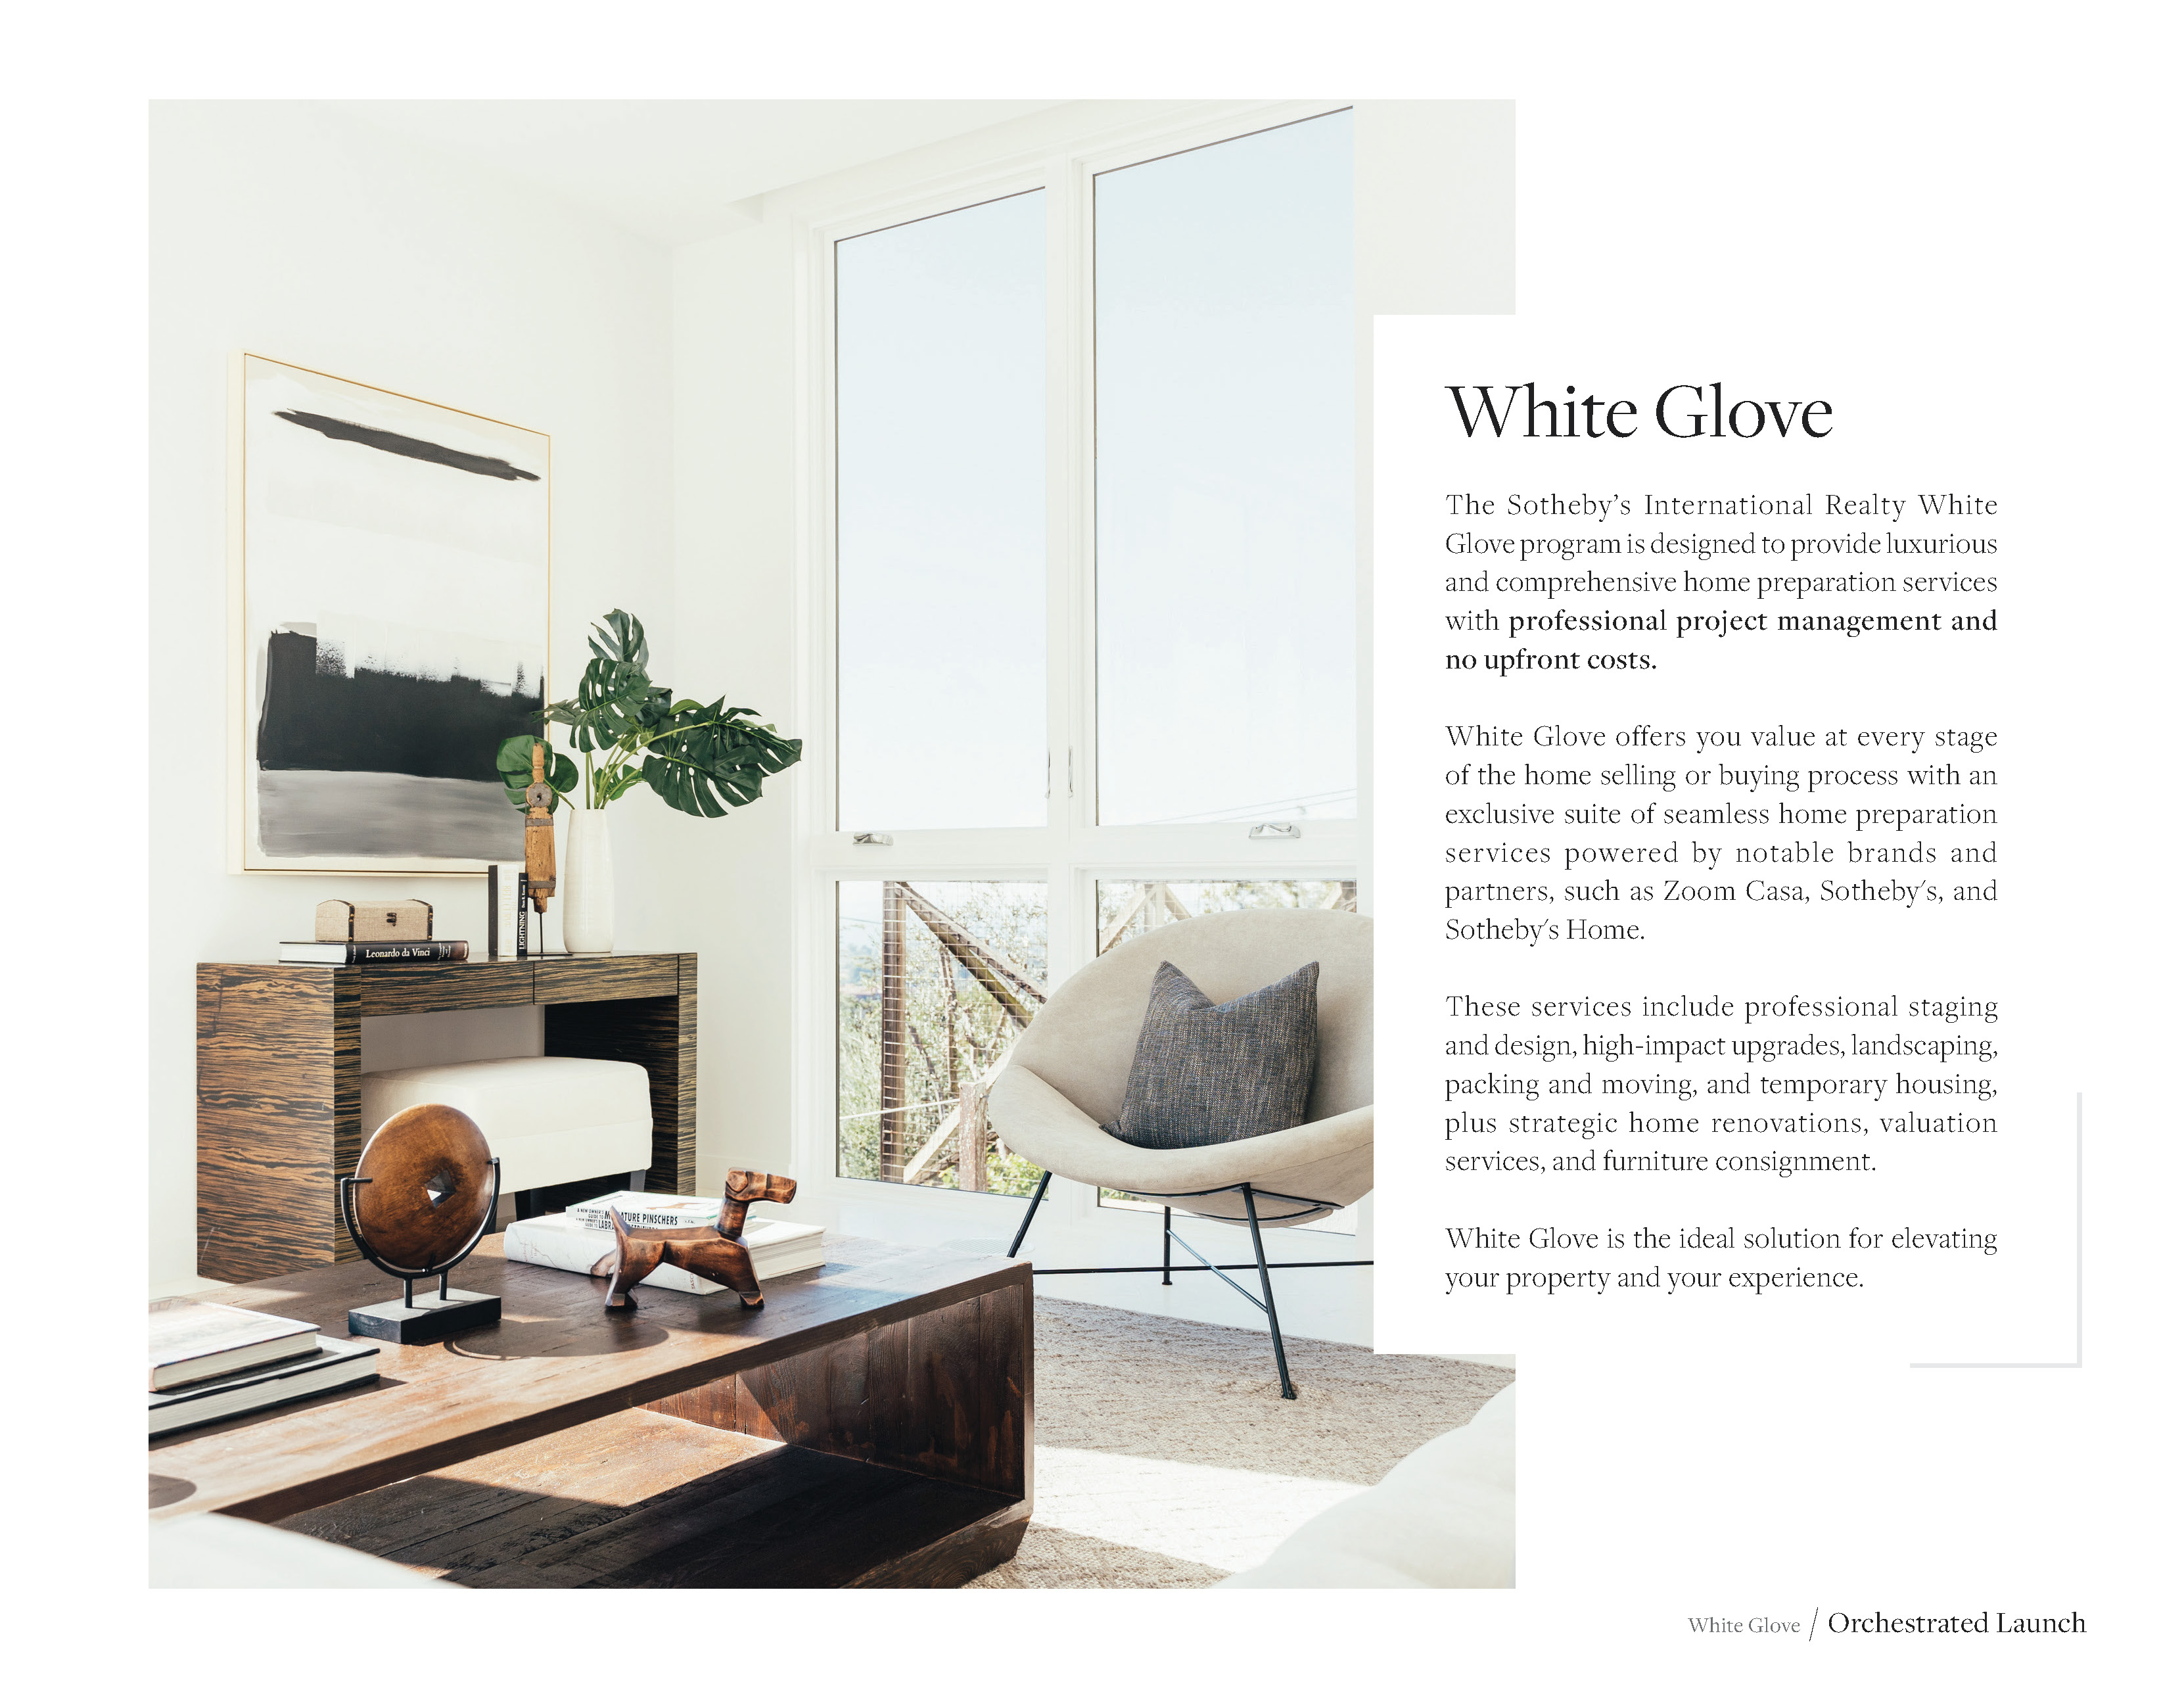 Discover seamless home preparation solutions through Sotheby's White Glove